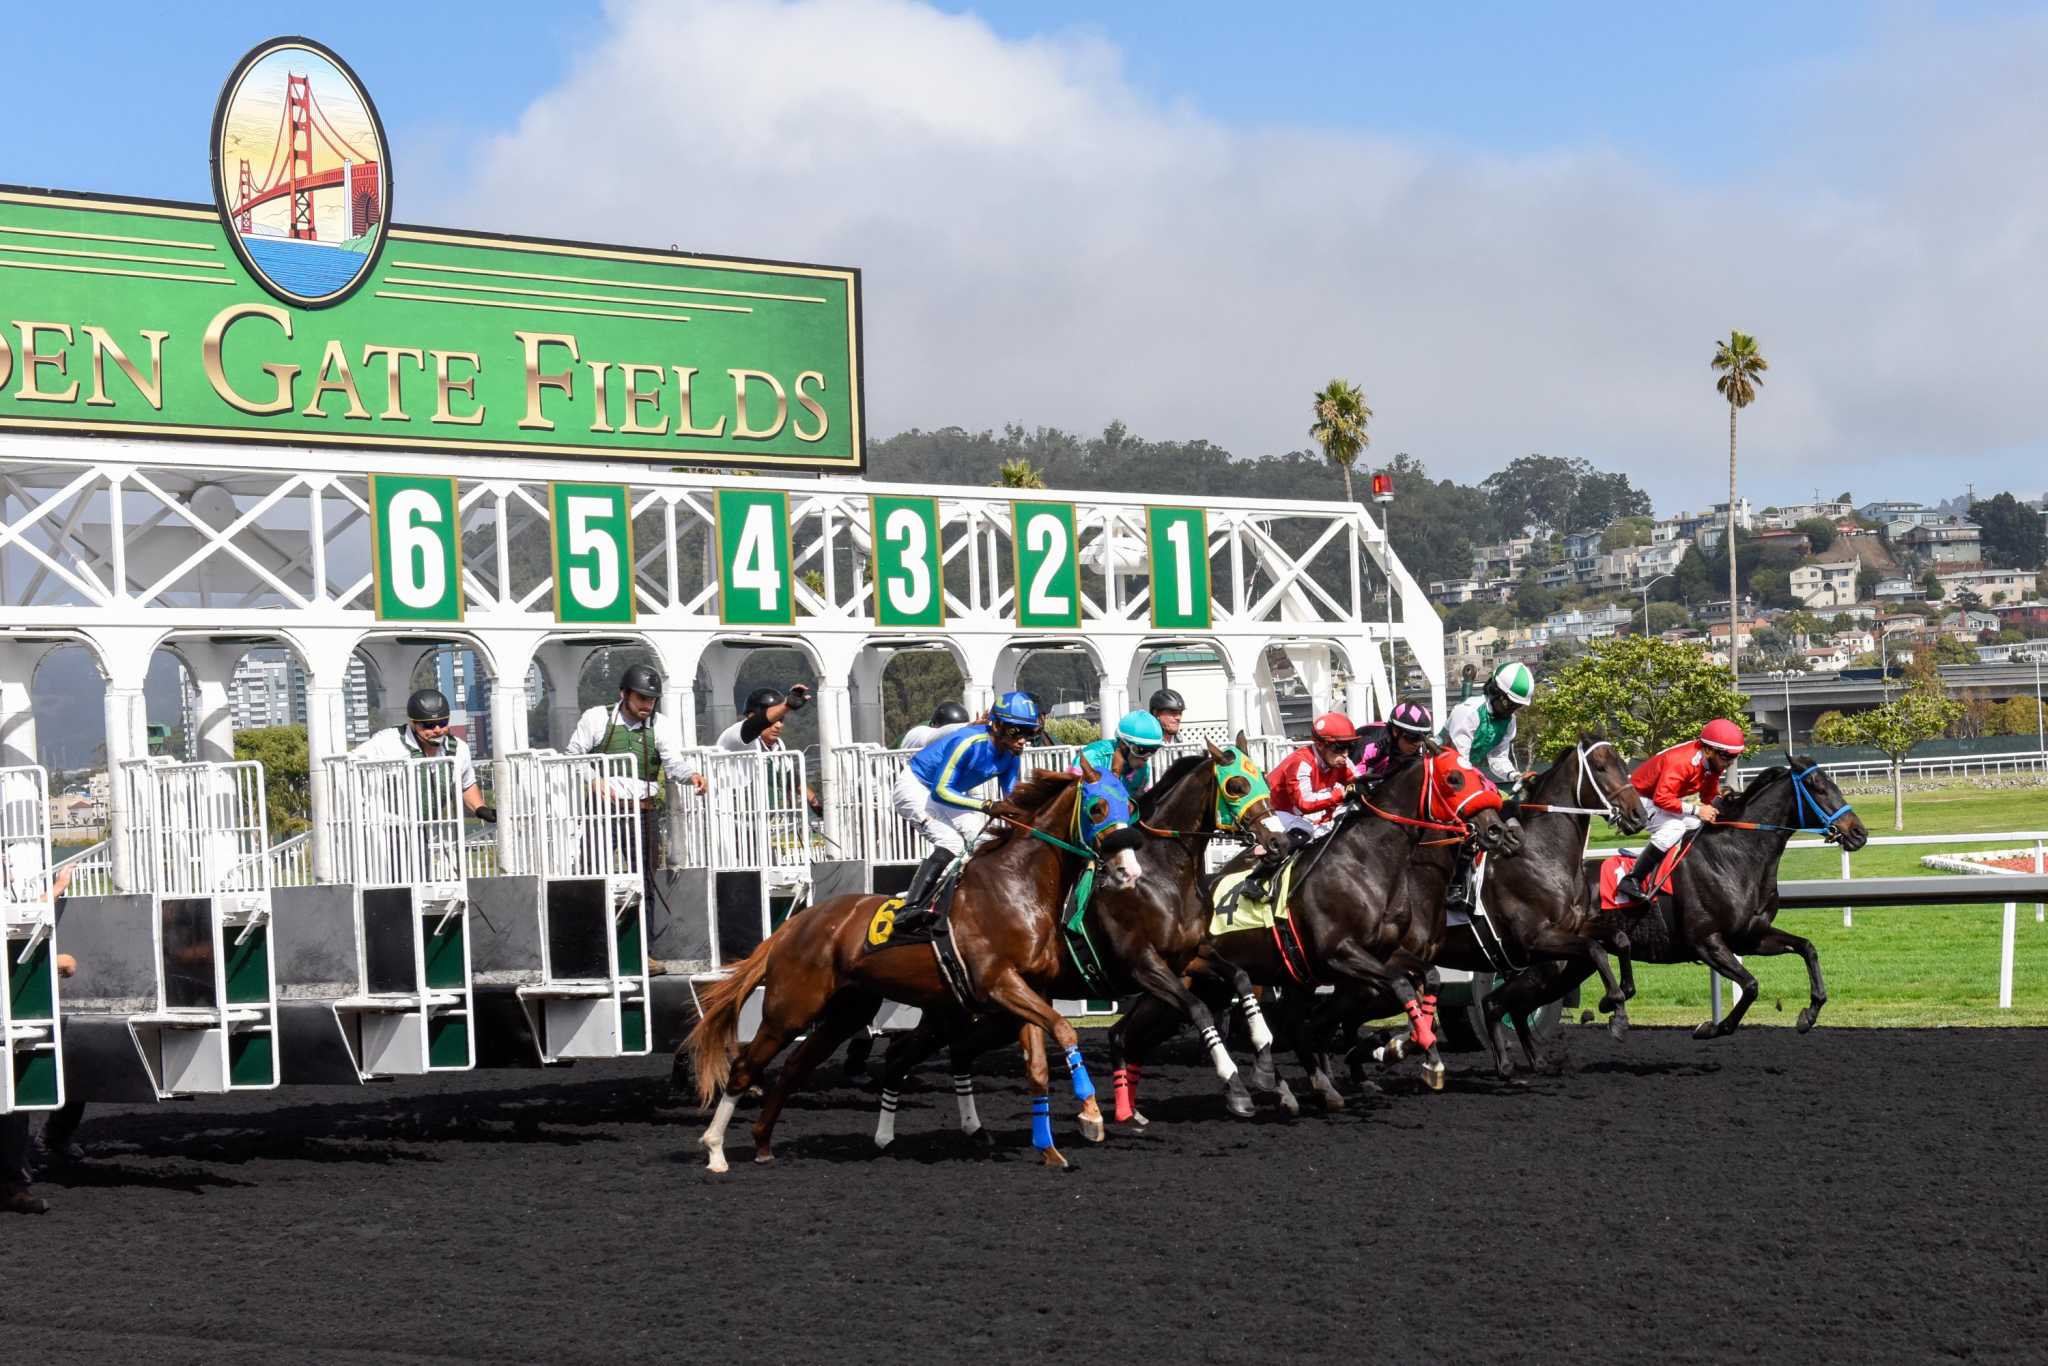 Golden Gate Fields owners can sue animal-rights group that disrupted races, state Supreme Court says